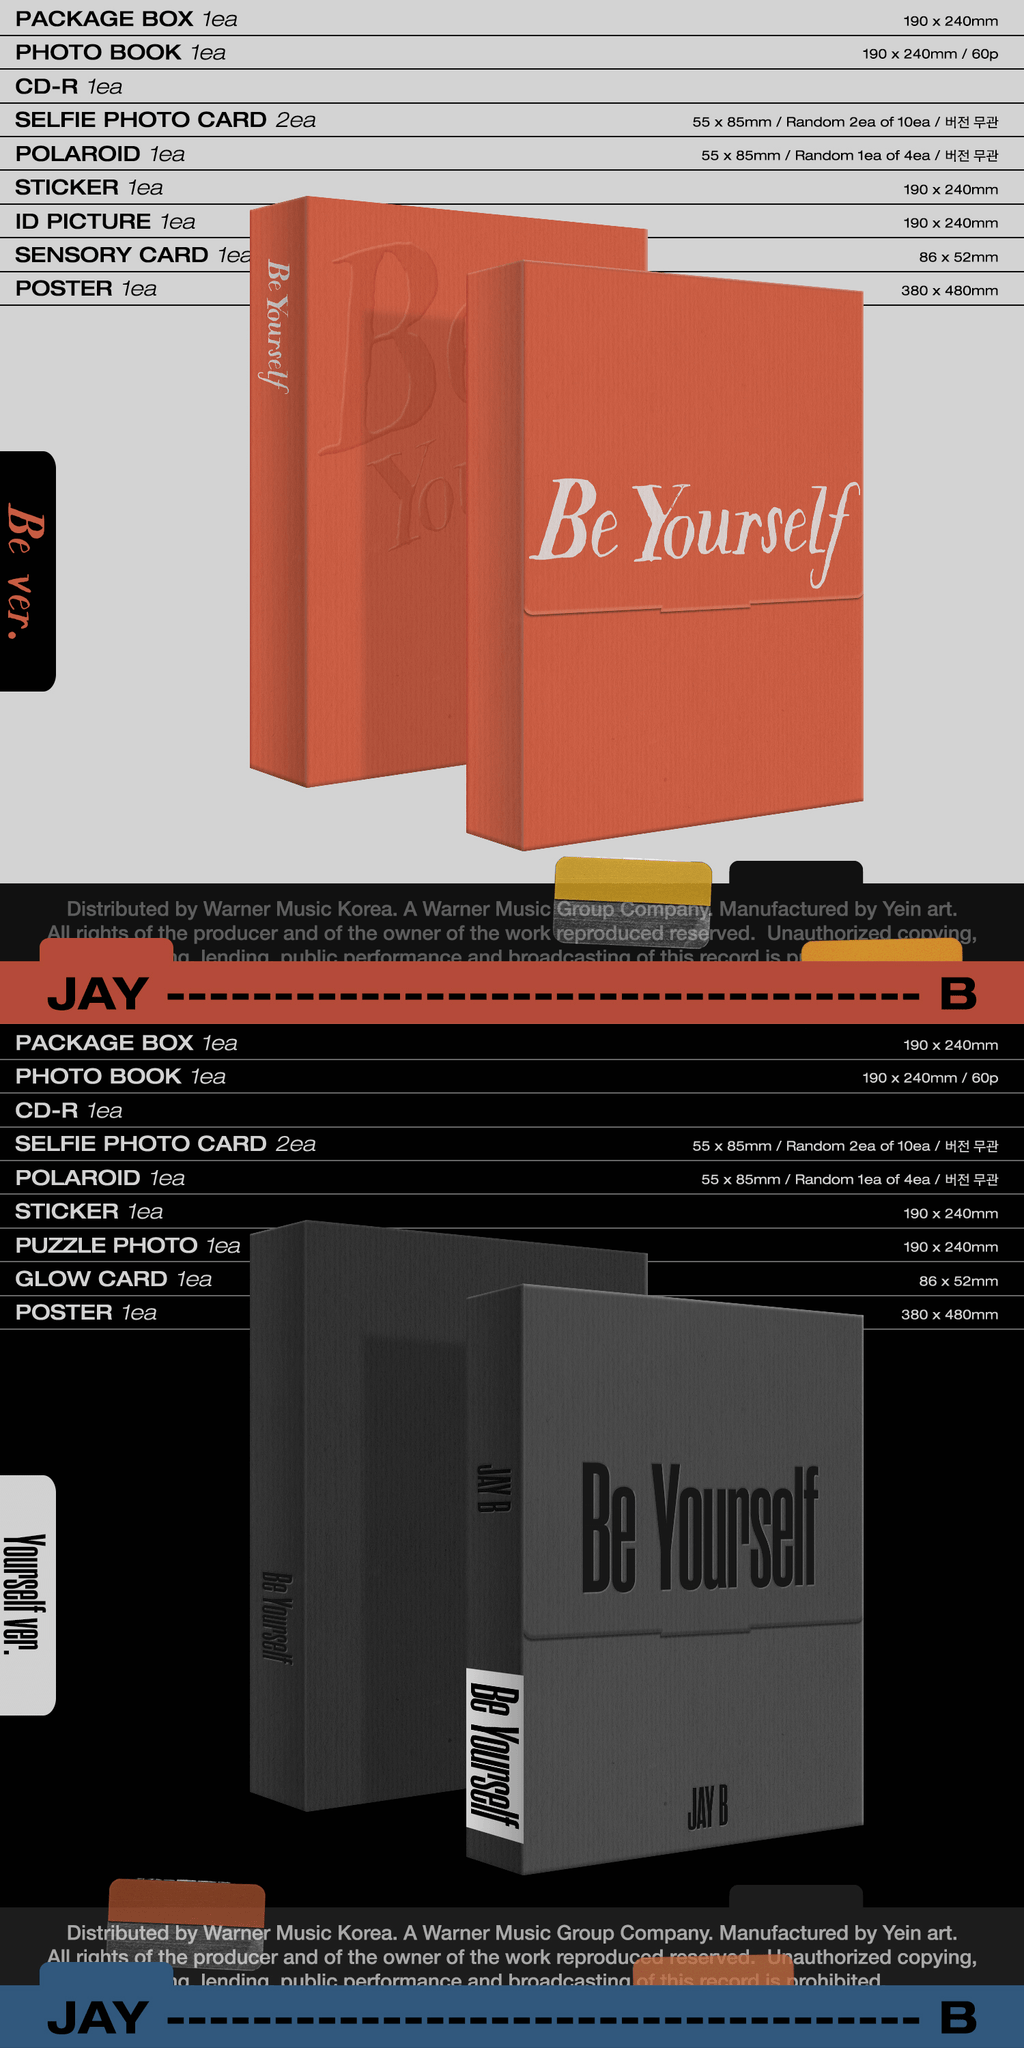 Jay B Be Yourself Inclusions Package Box Photobook CD Selfie Photocard Polaroid Sticker Poster ID Picture Sensory Card Puzzle Photo Glow Card